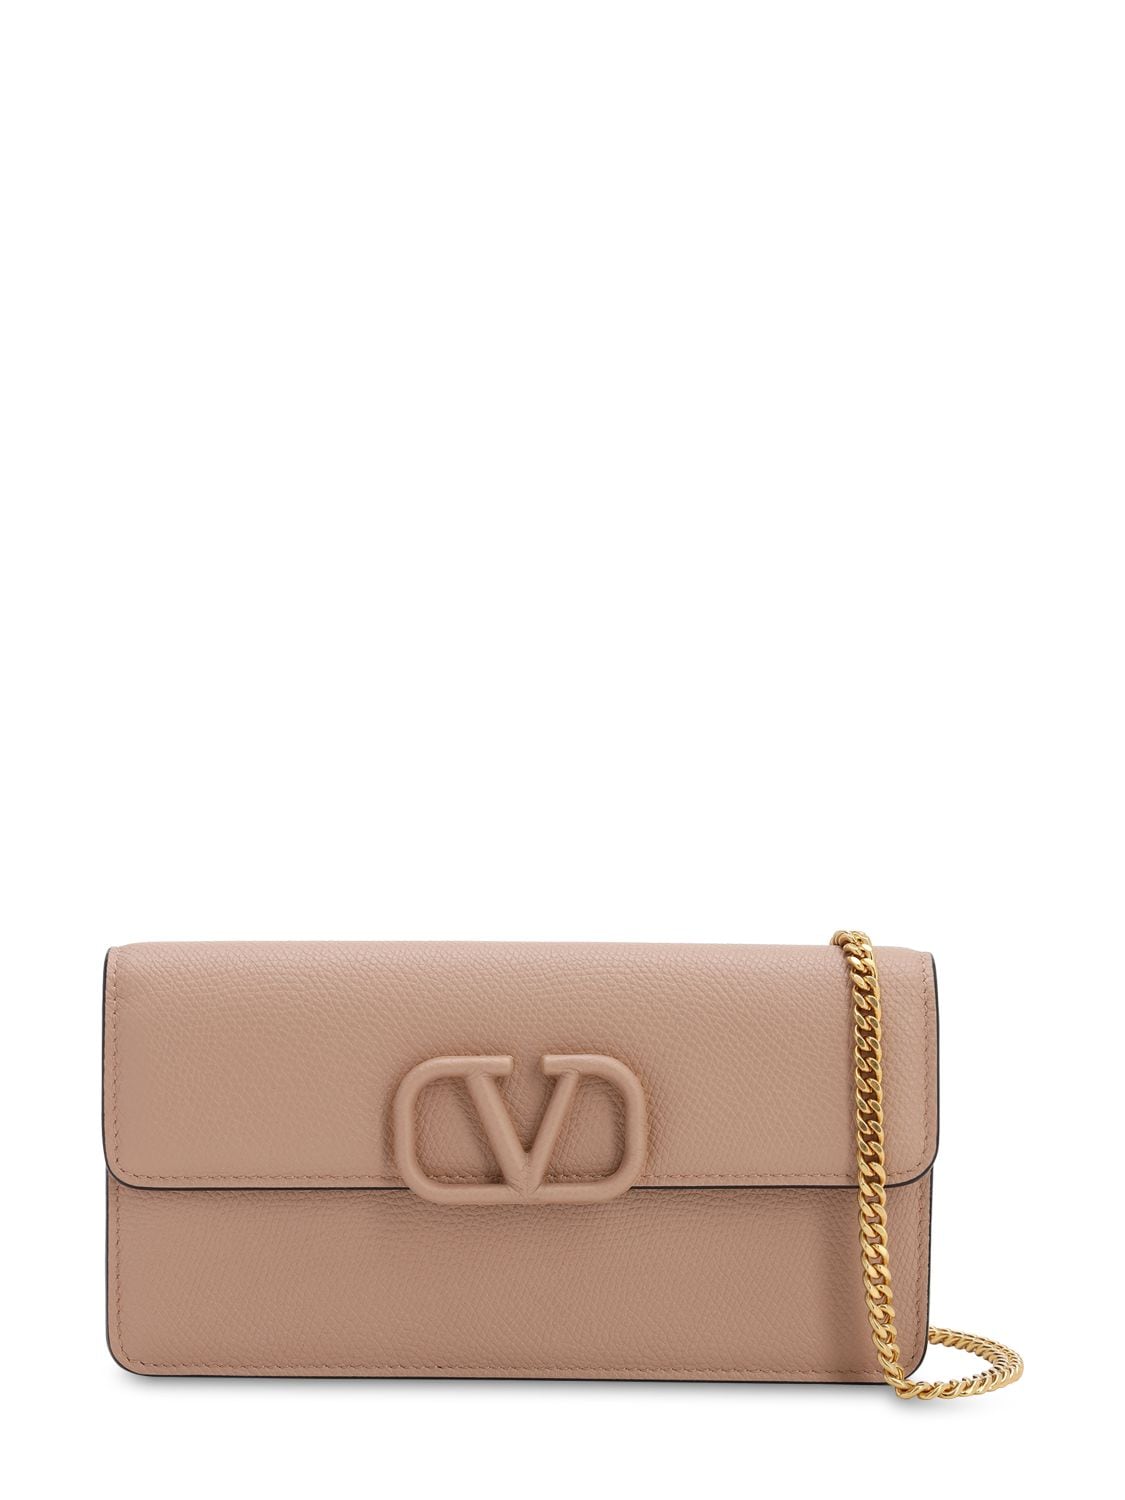 Valentino Garavani Vring Grained Leather Chain Wallet In Rose Canelle